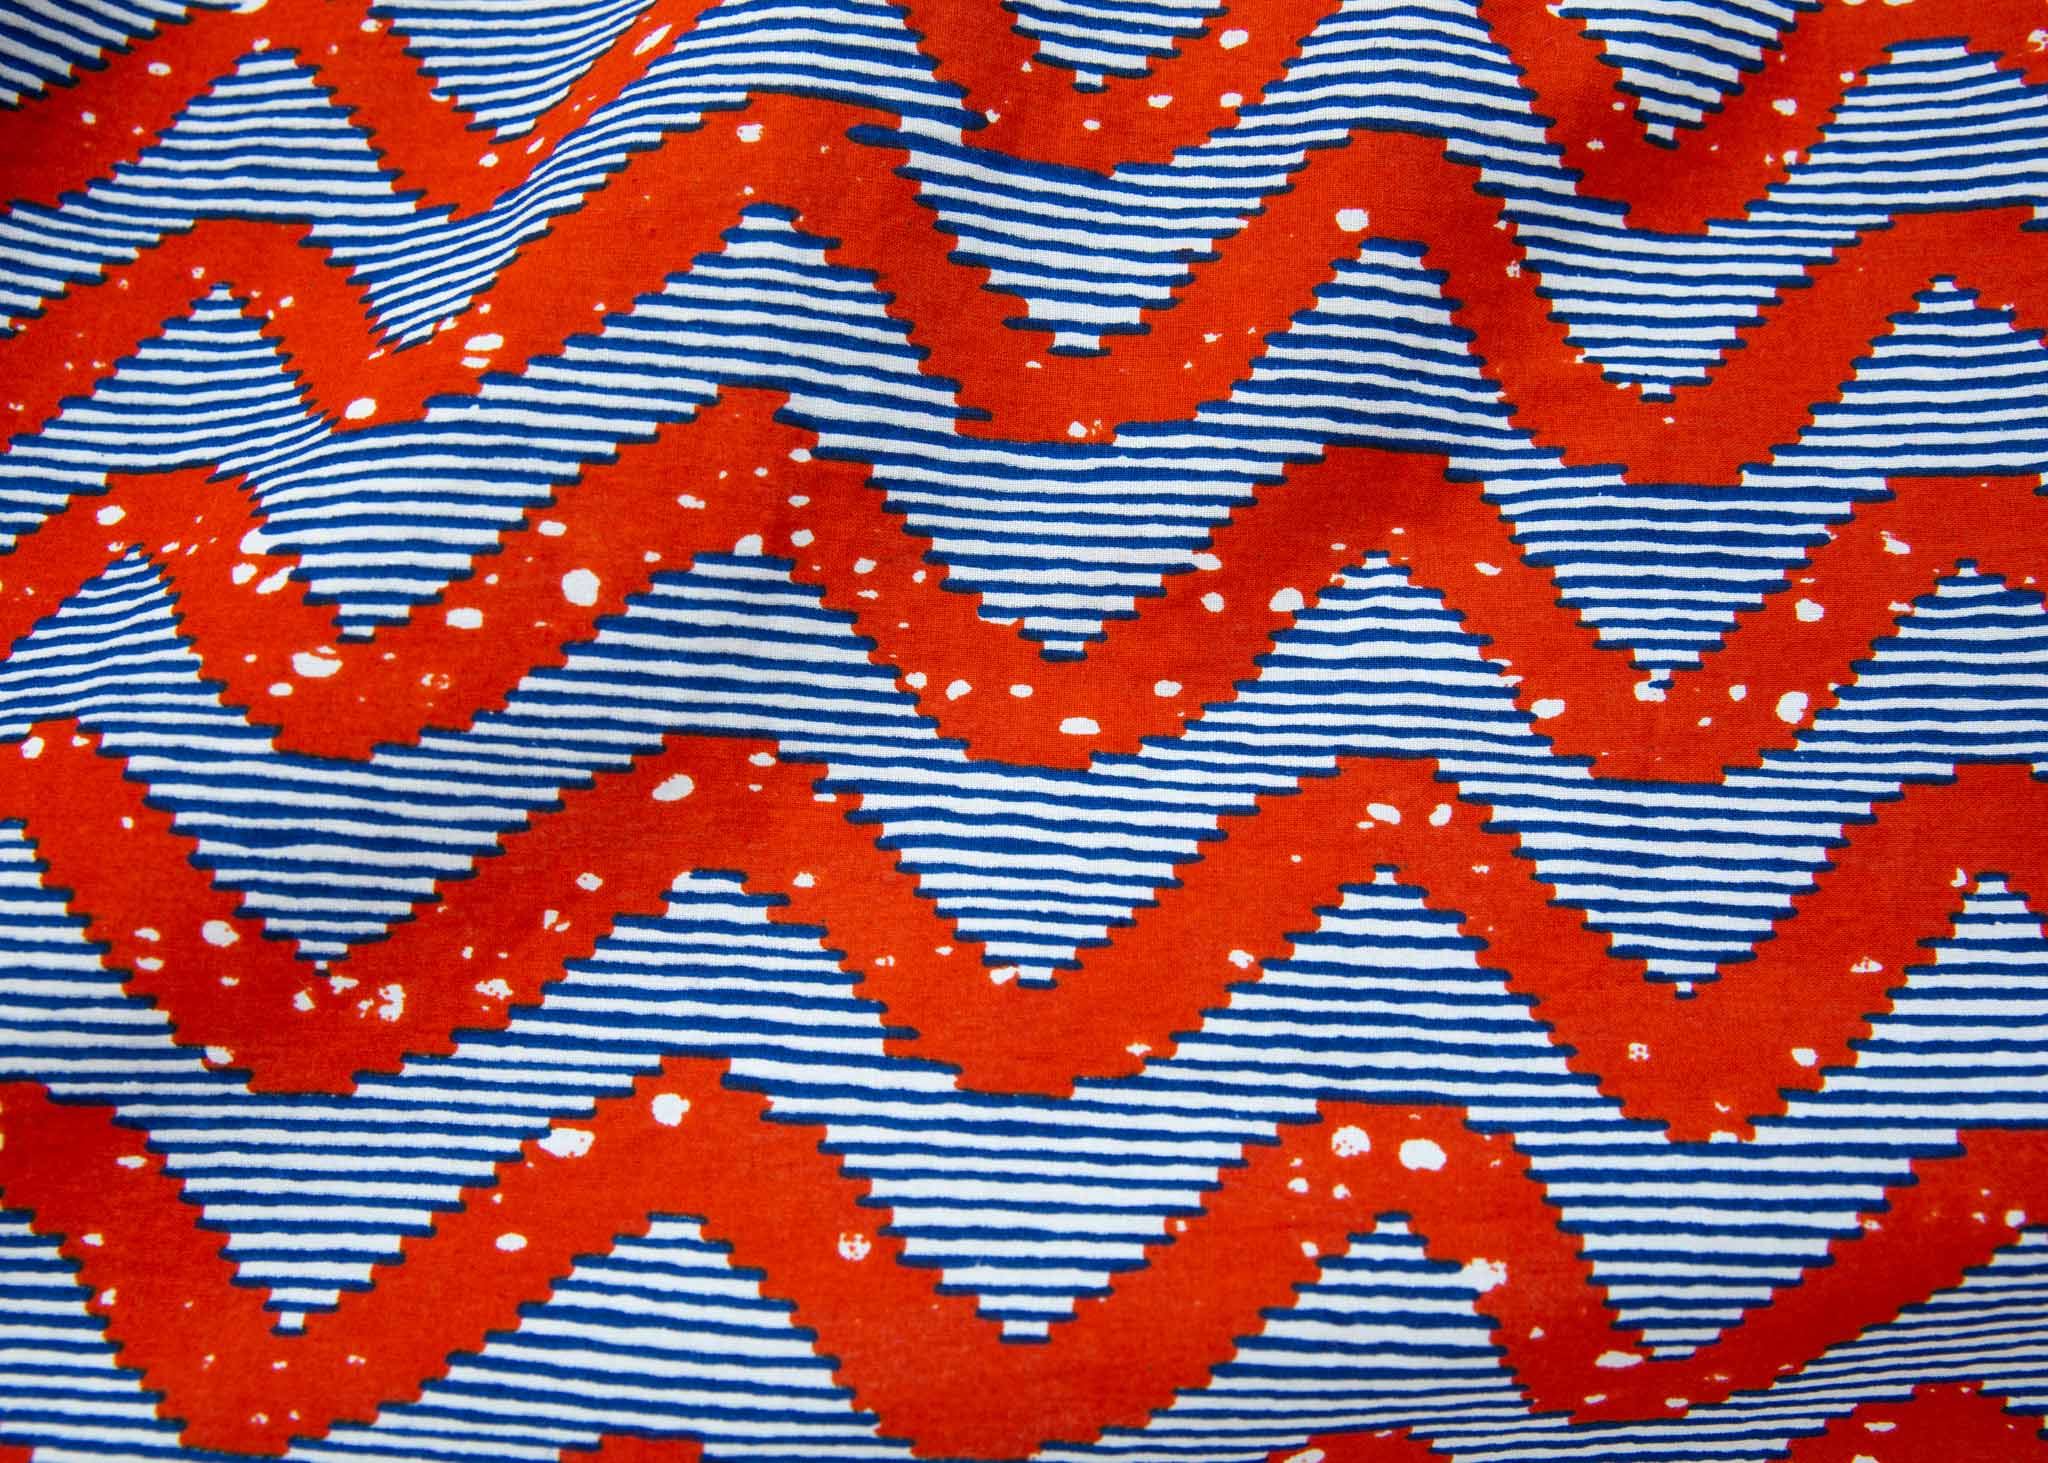 Close up display of blue and red zigzag print fabric.